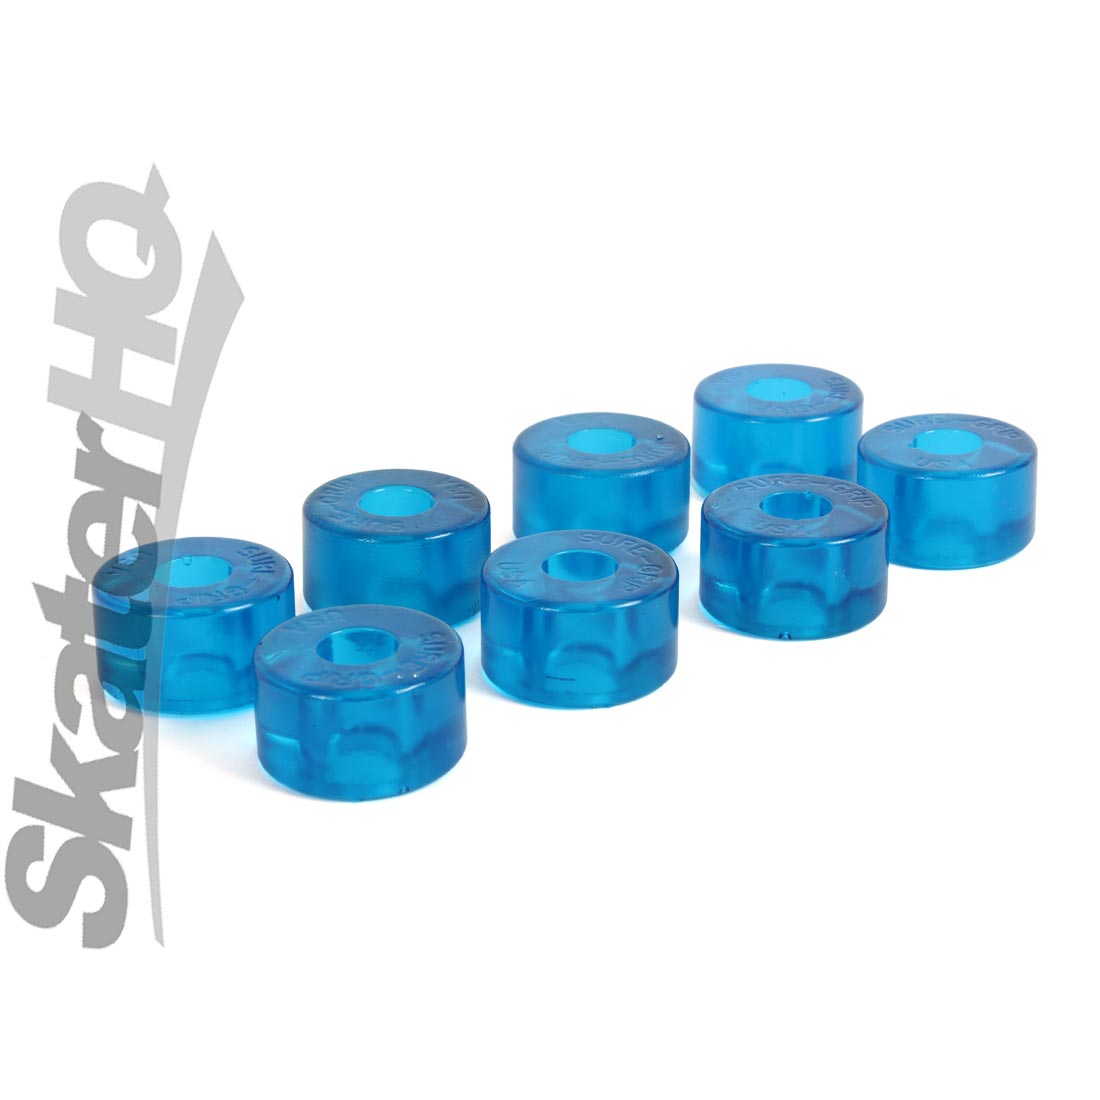 Sure-Grip Barrel Cushions 72a 8pk - Blue Roller Skate Hardware and Parts